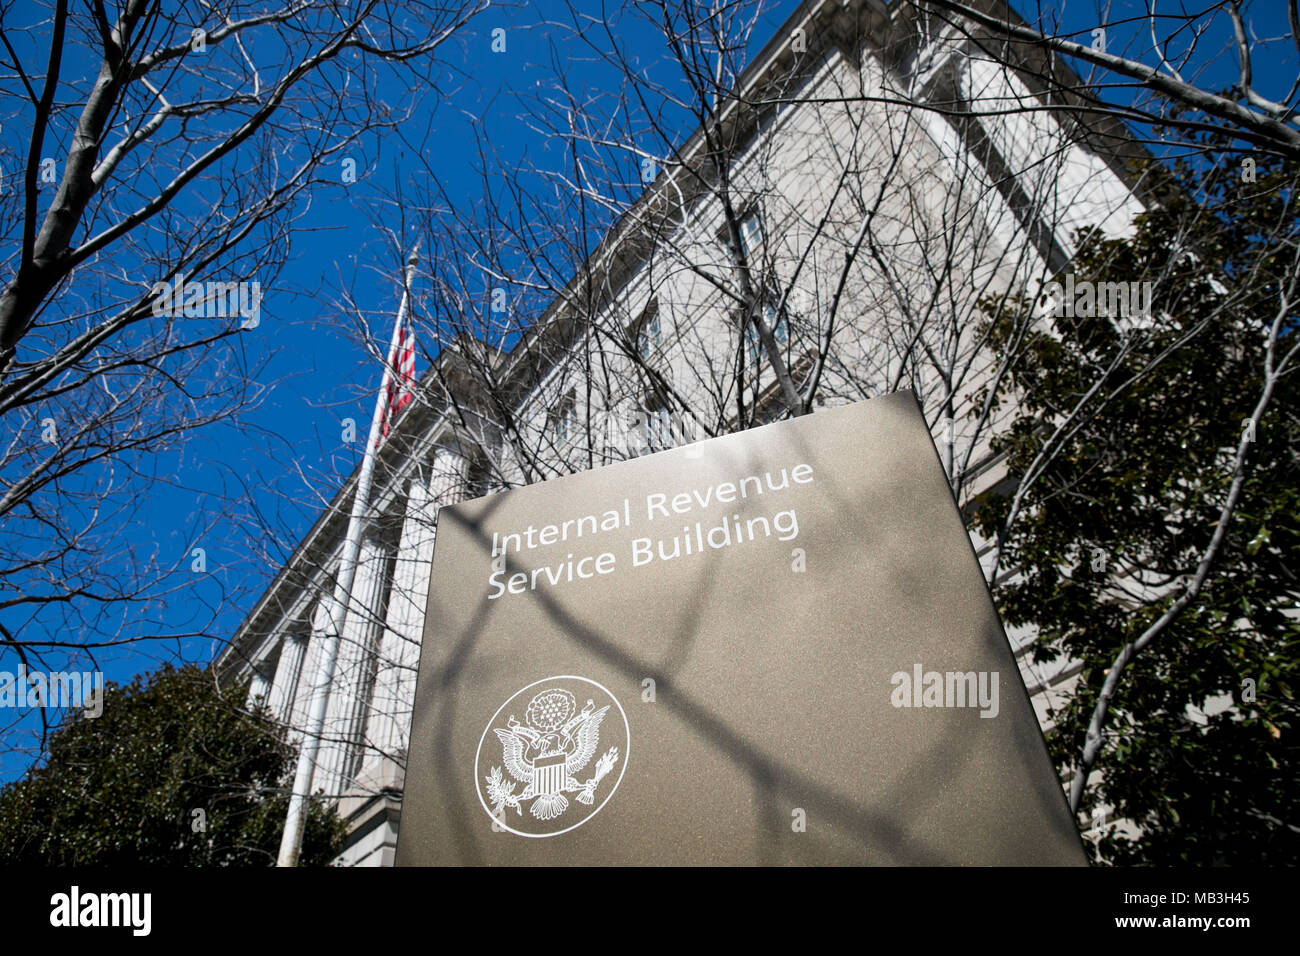 A logo sign outside of the headquarters of the Internal Revenue Service (IRS) in downtown Washington, D.C., on March 31, 2018. Stock Photo